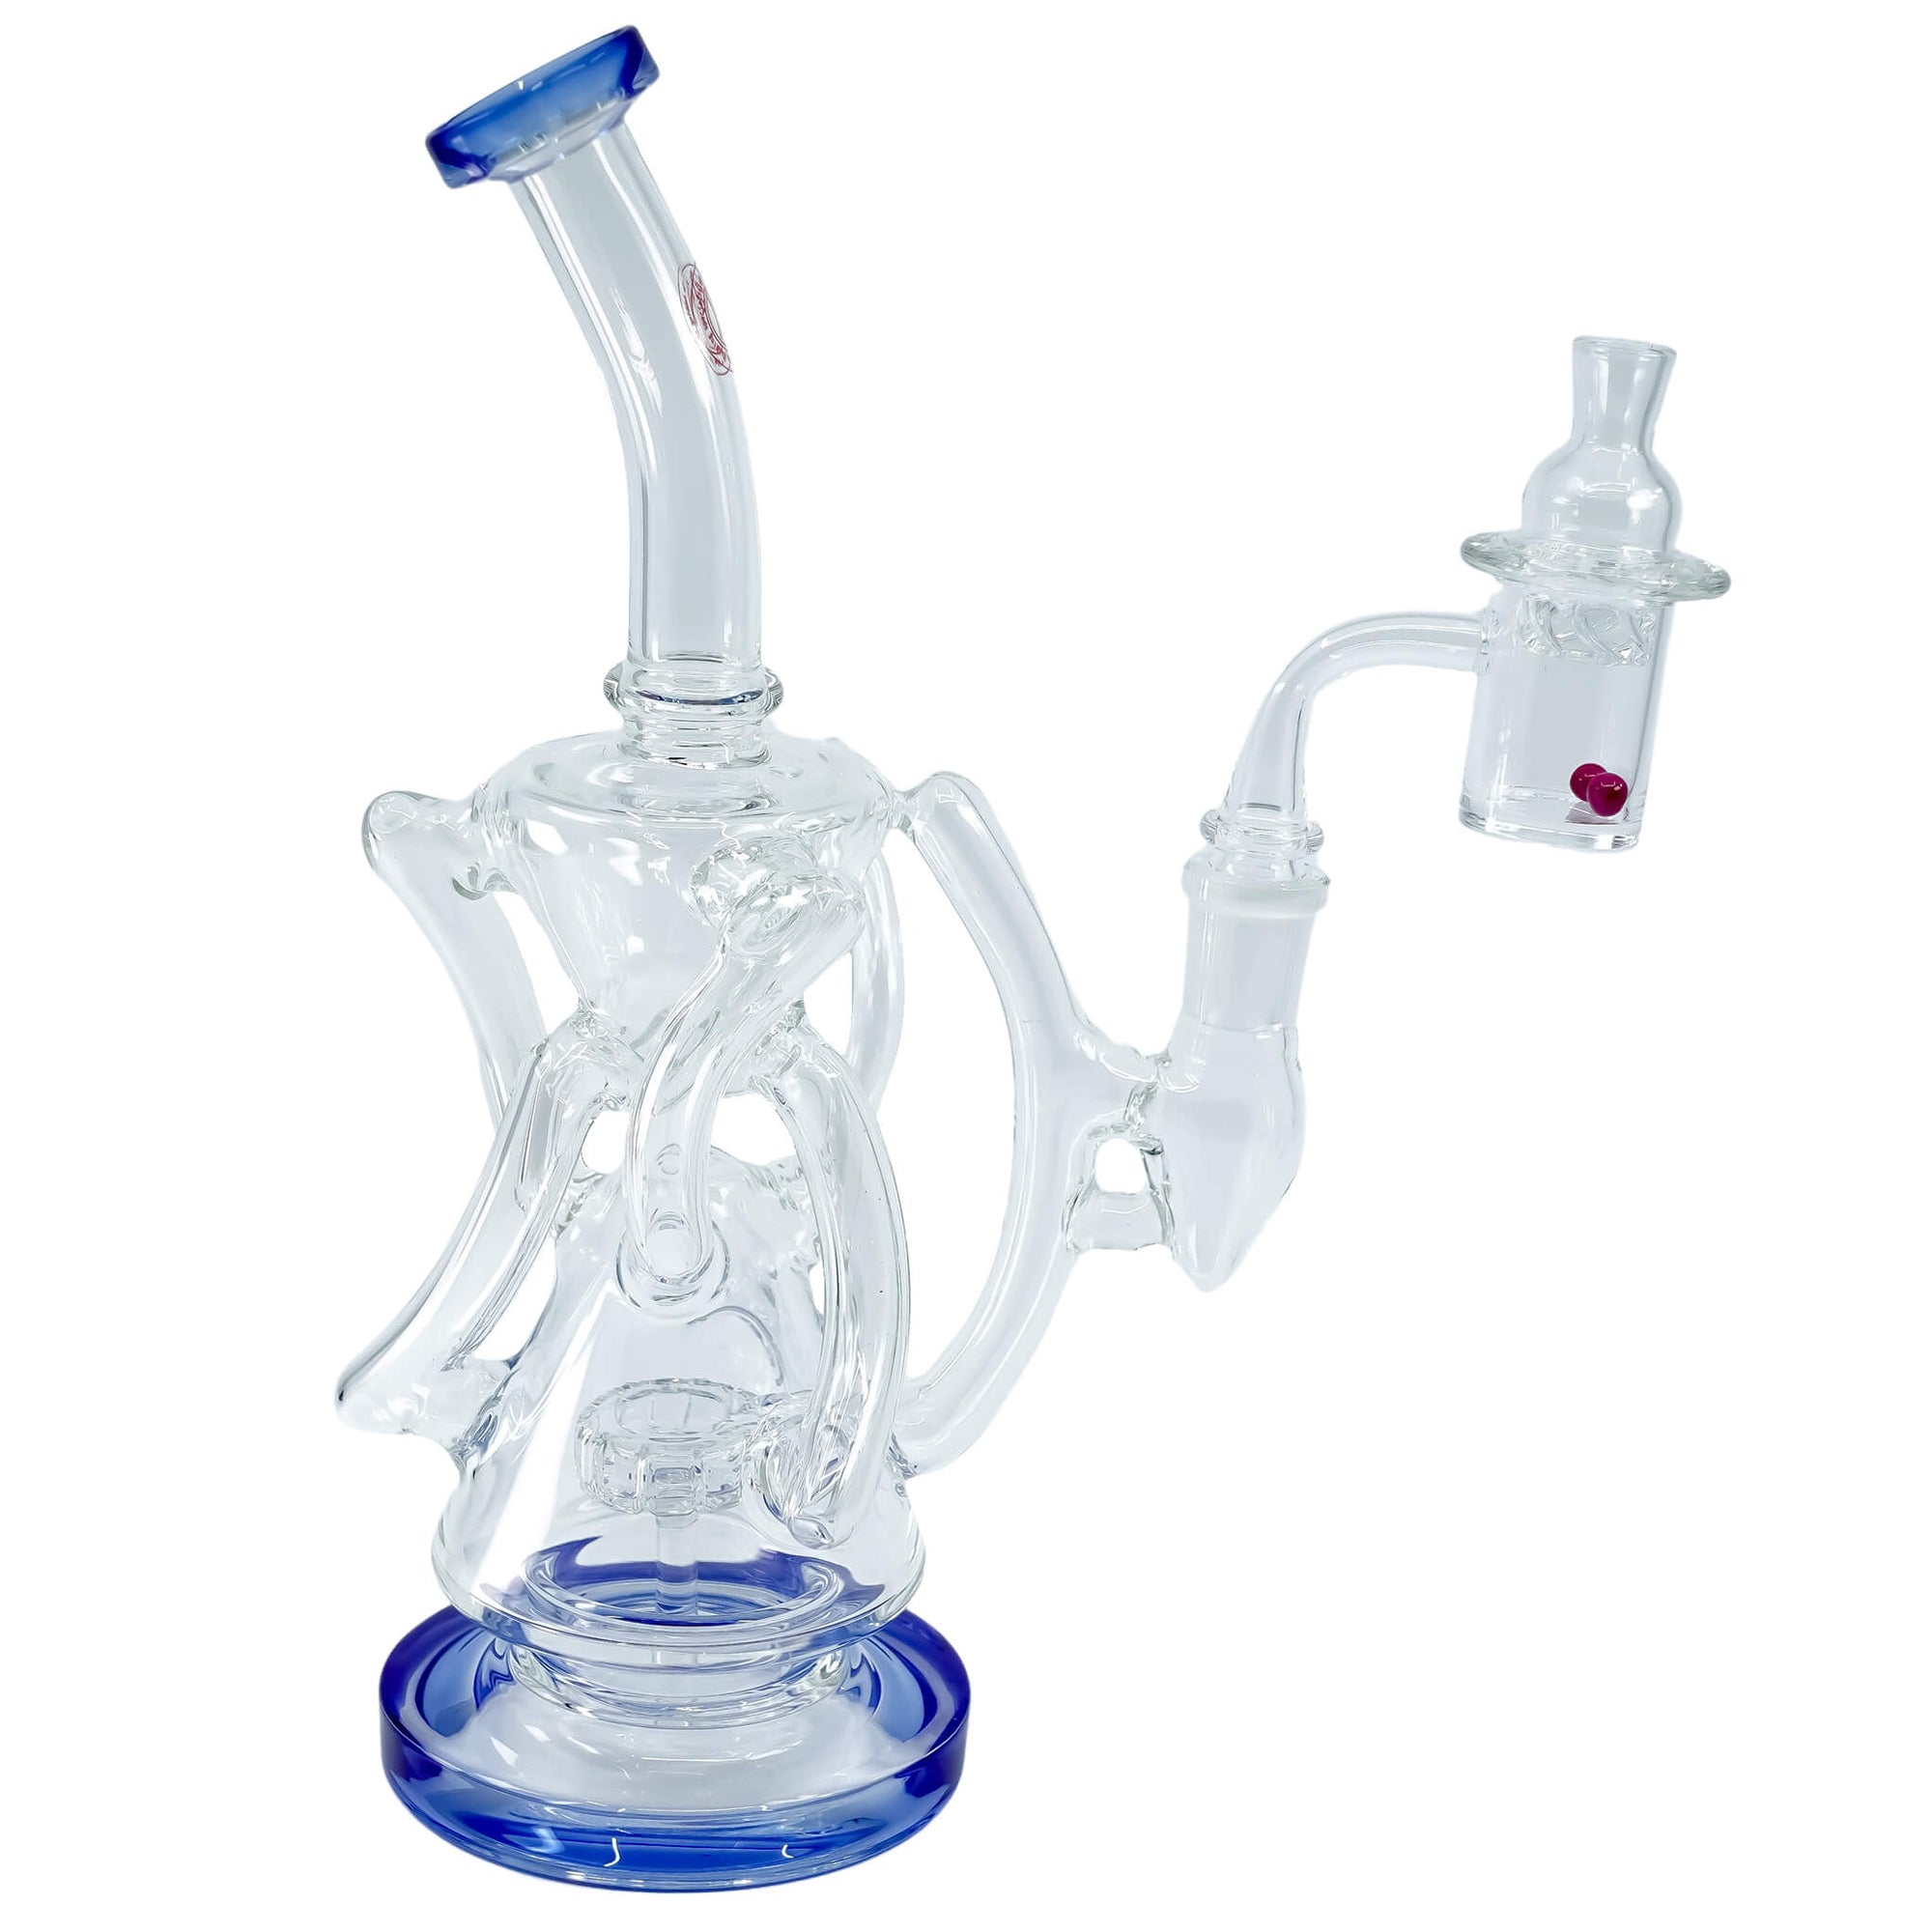 Trifecta 25mm Handmade Joint Complete Dabbing Kit #1 | Blue With Ruby Pearls View | DW